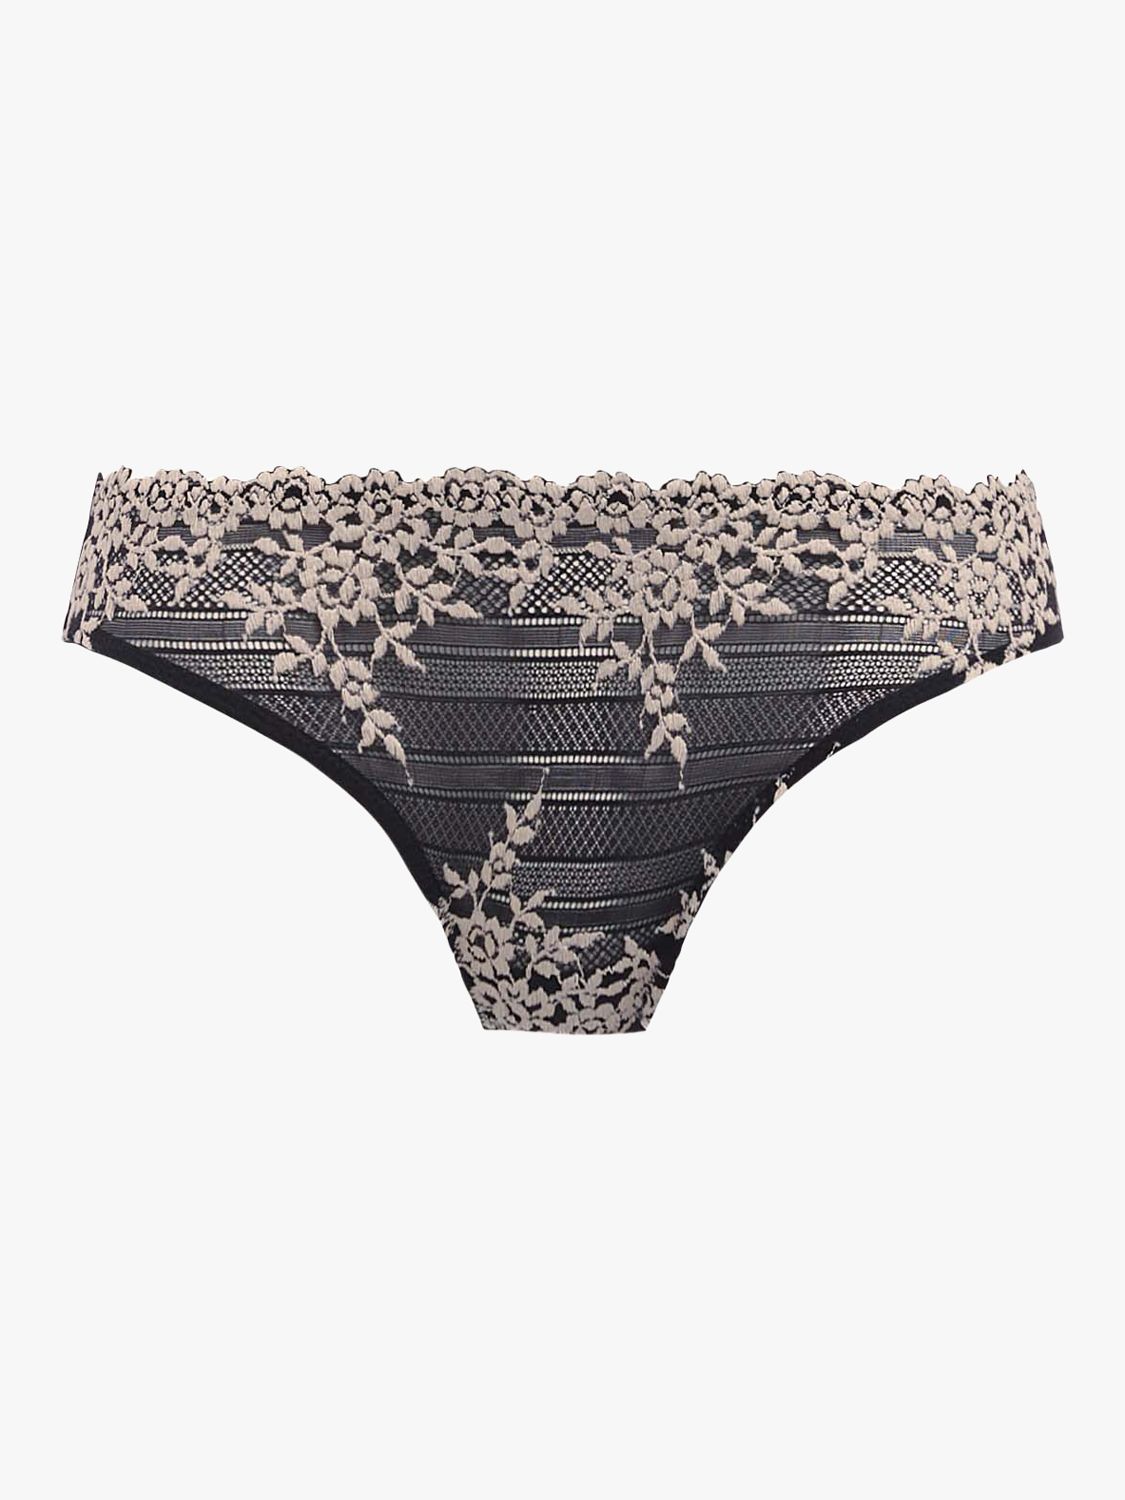 Buy Victoria's Secret Scalloped Lace Hipster Thong Panty from the  Victoria's Secret UK online shop